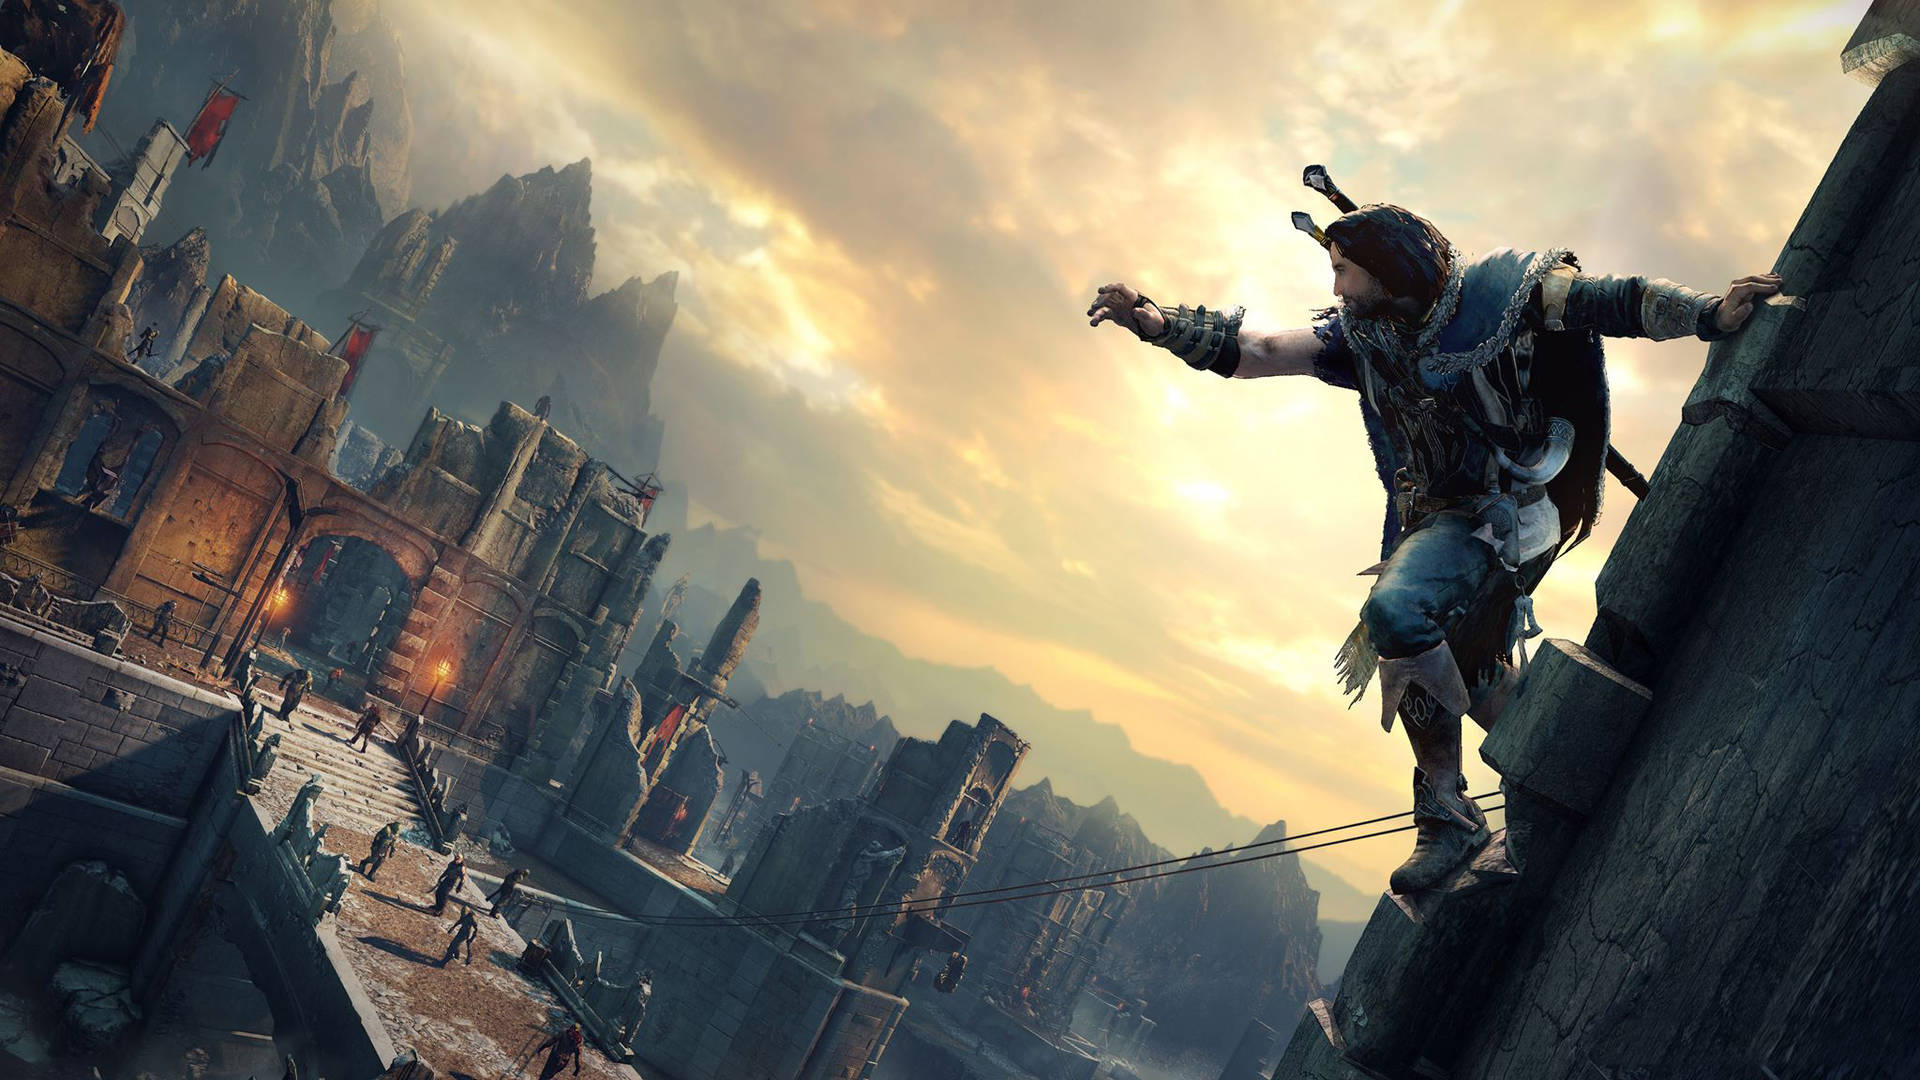 Shadow Of Mordor Warrior In Tower Background